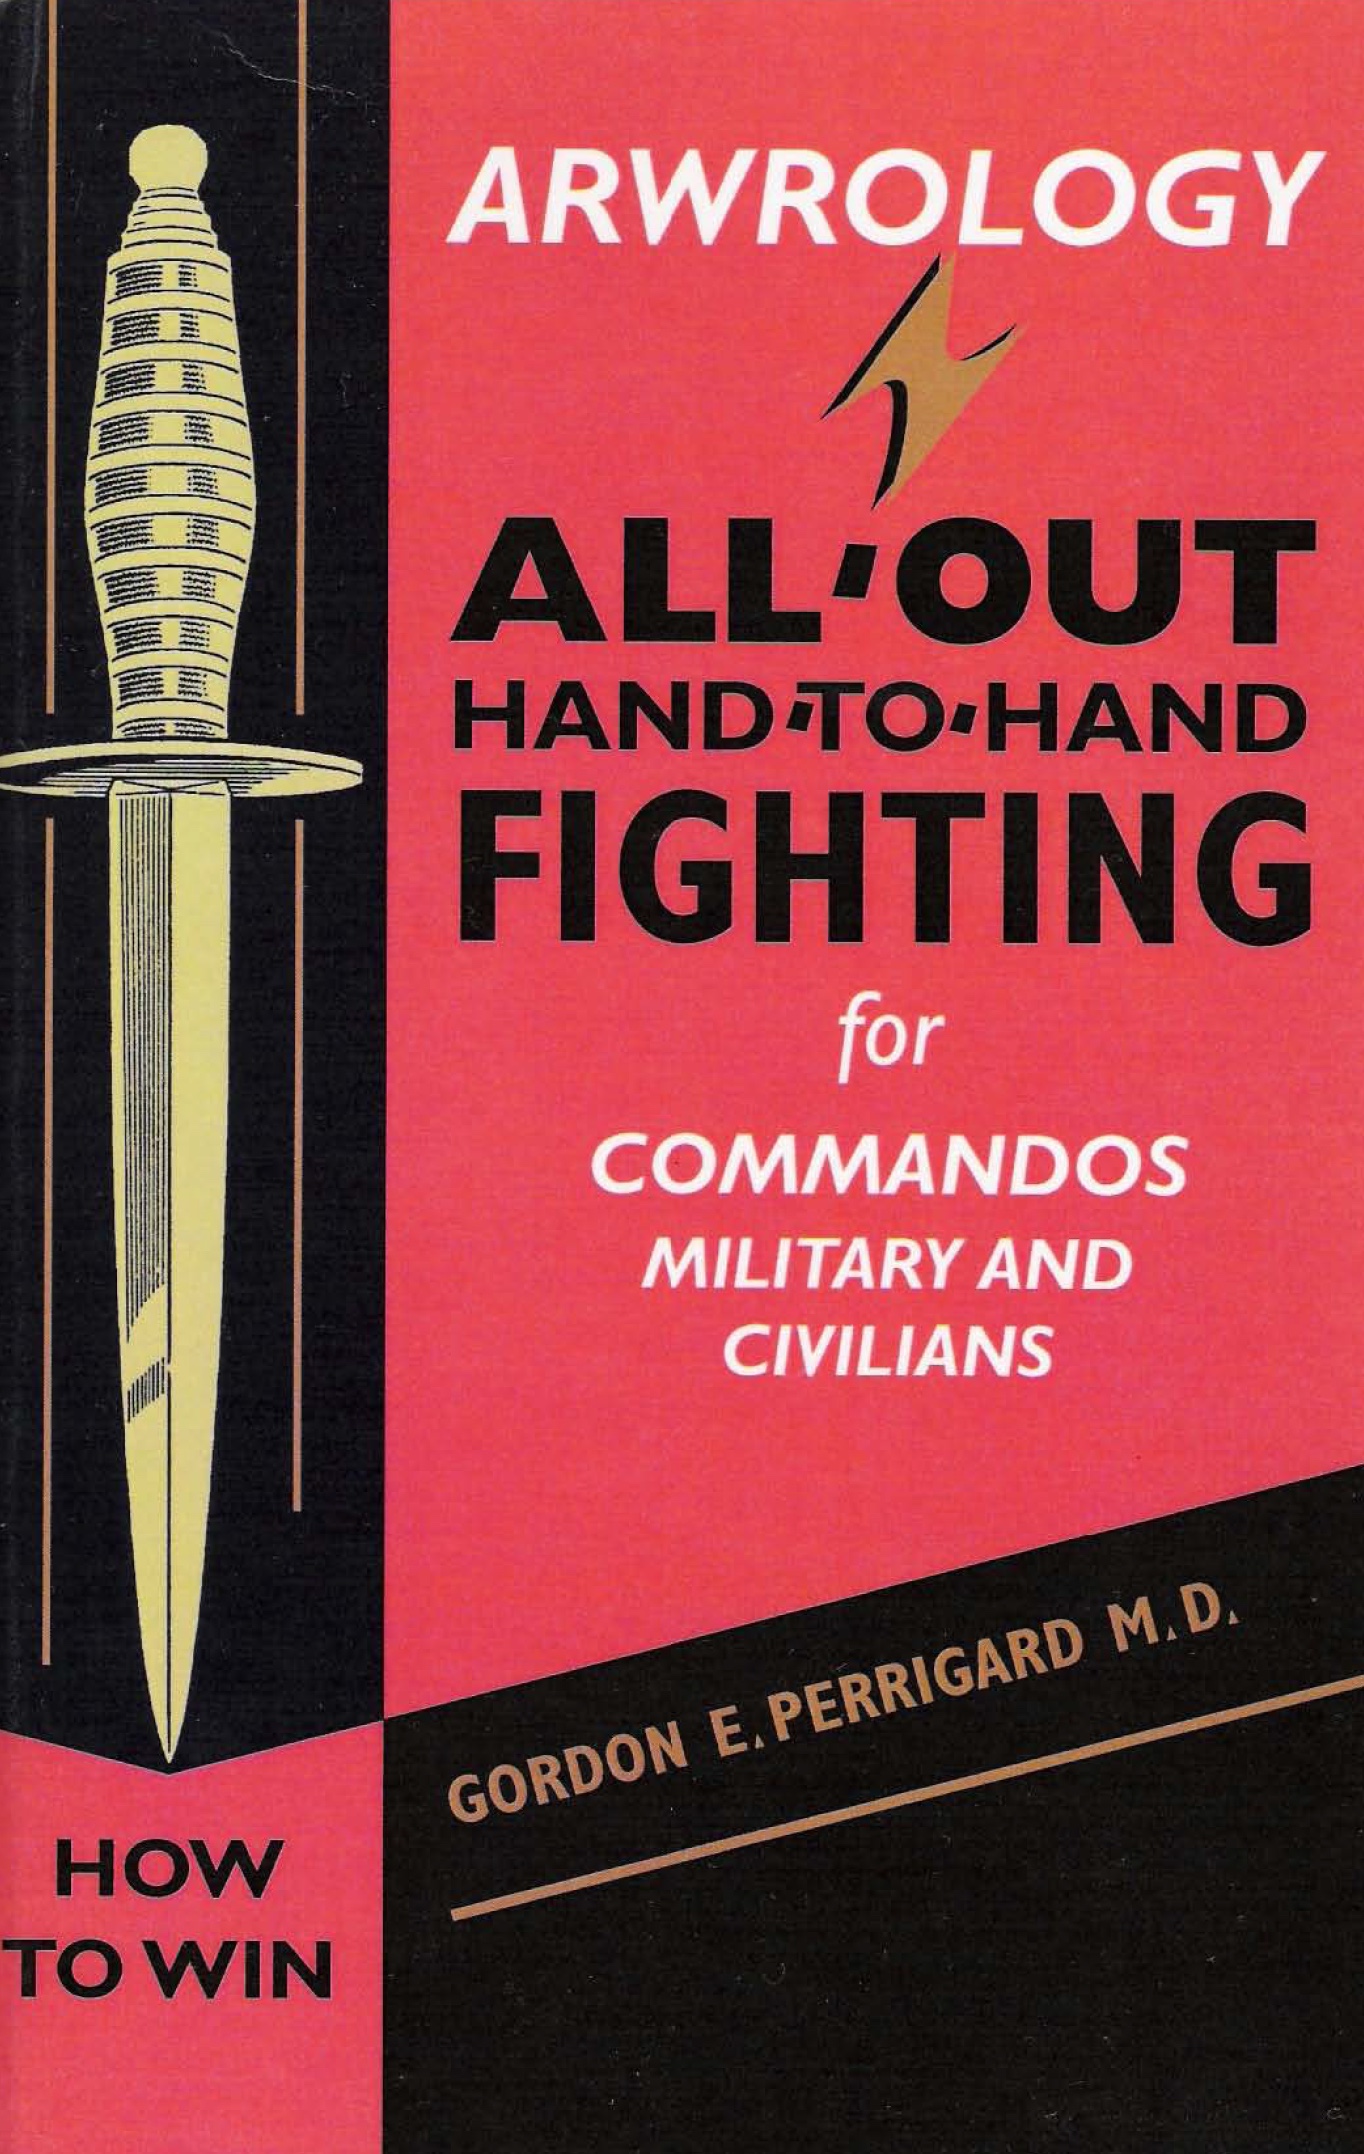 ESERCITO CANADA Arwrology 1943 (eng) All Out Hand-to-Hand Fighting - <b>DOWNLOAD</b>